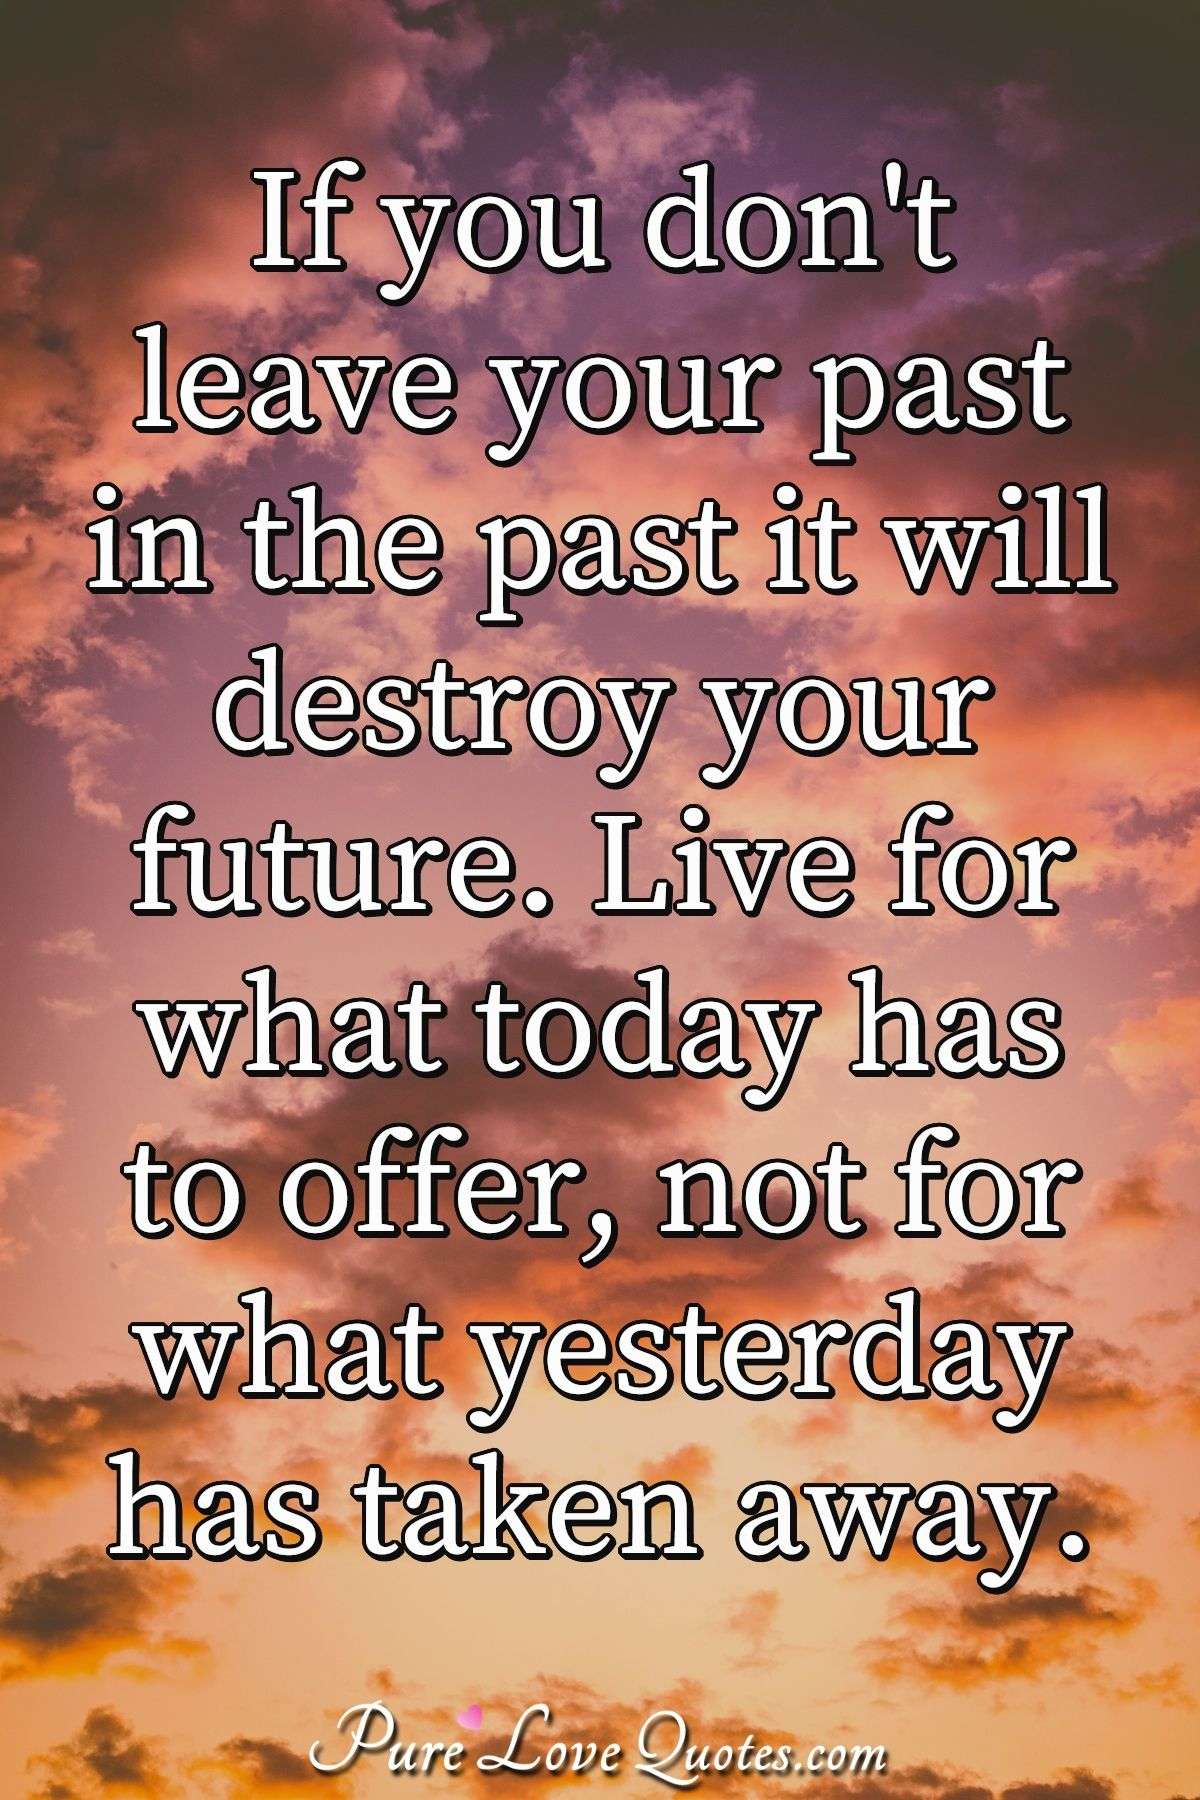 If you don't leave your past in the past it will destroy your future. Live for what today has to offer, not for what yesterday has taken away. - Anonymous